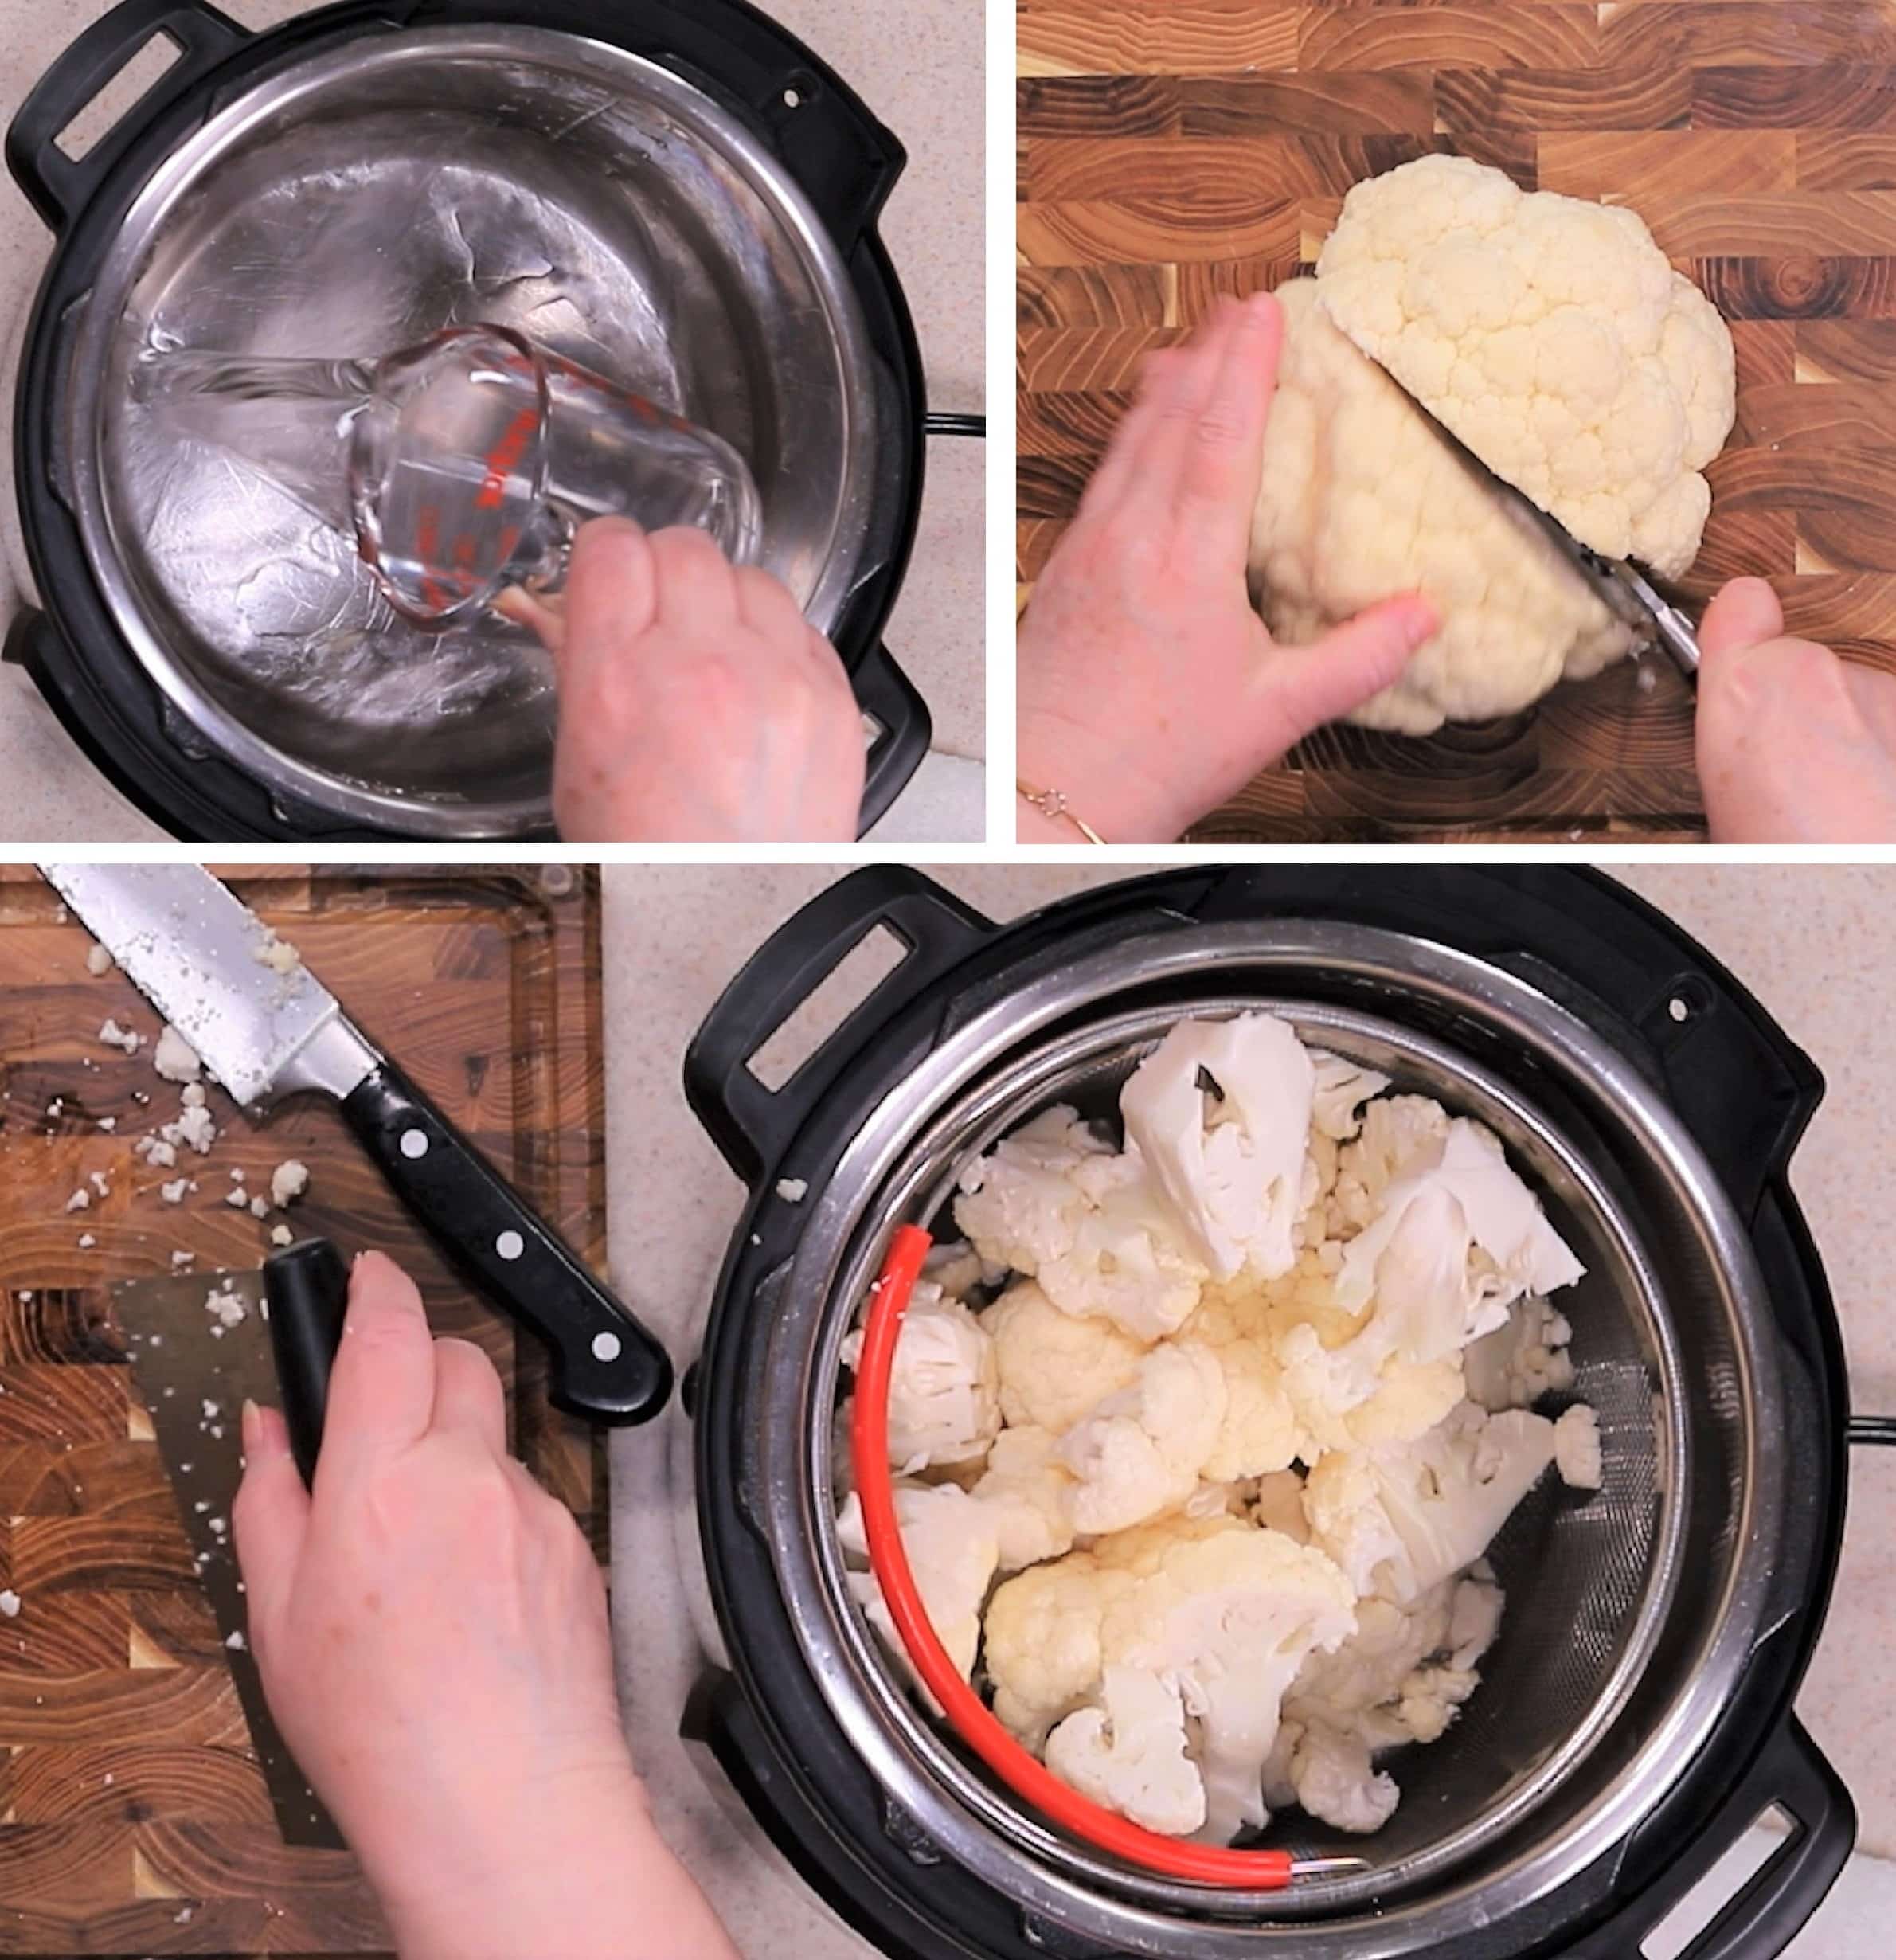 Pouring water from glass measuring cup into instant pot. Then cutting cauliflower with a knife and then using a bench knife to put cauliflower into steamer basket and put into Instant Pot.